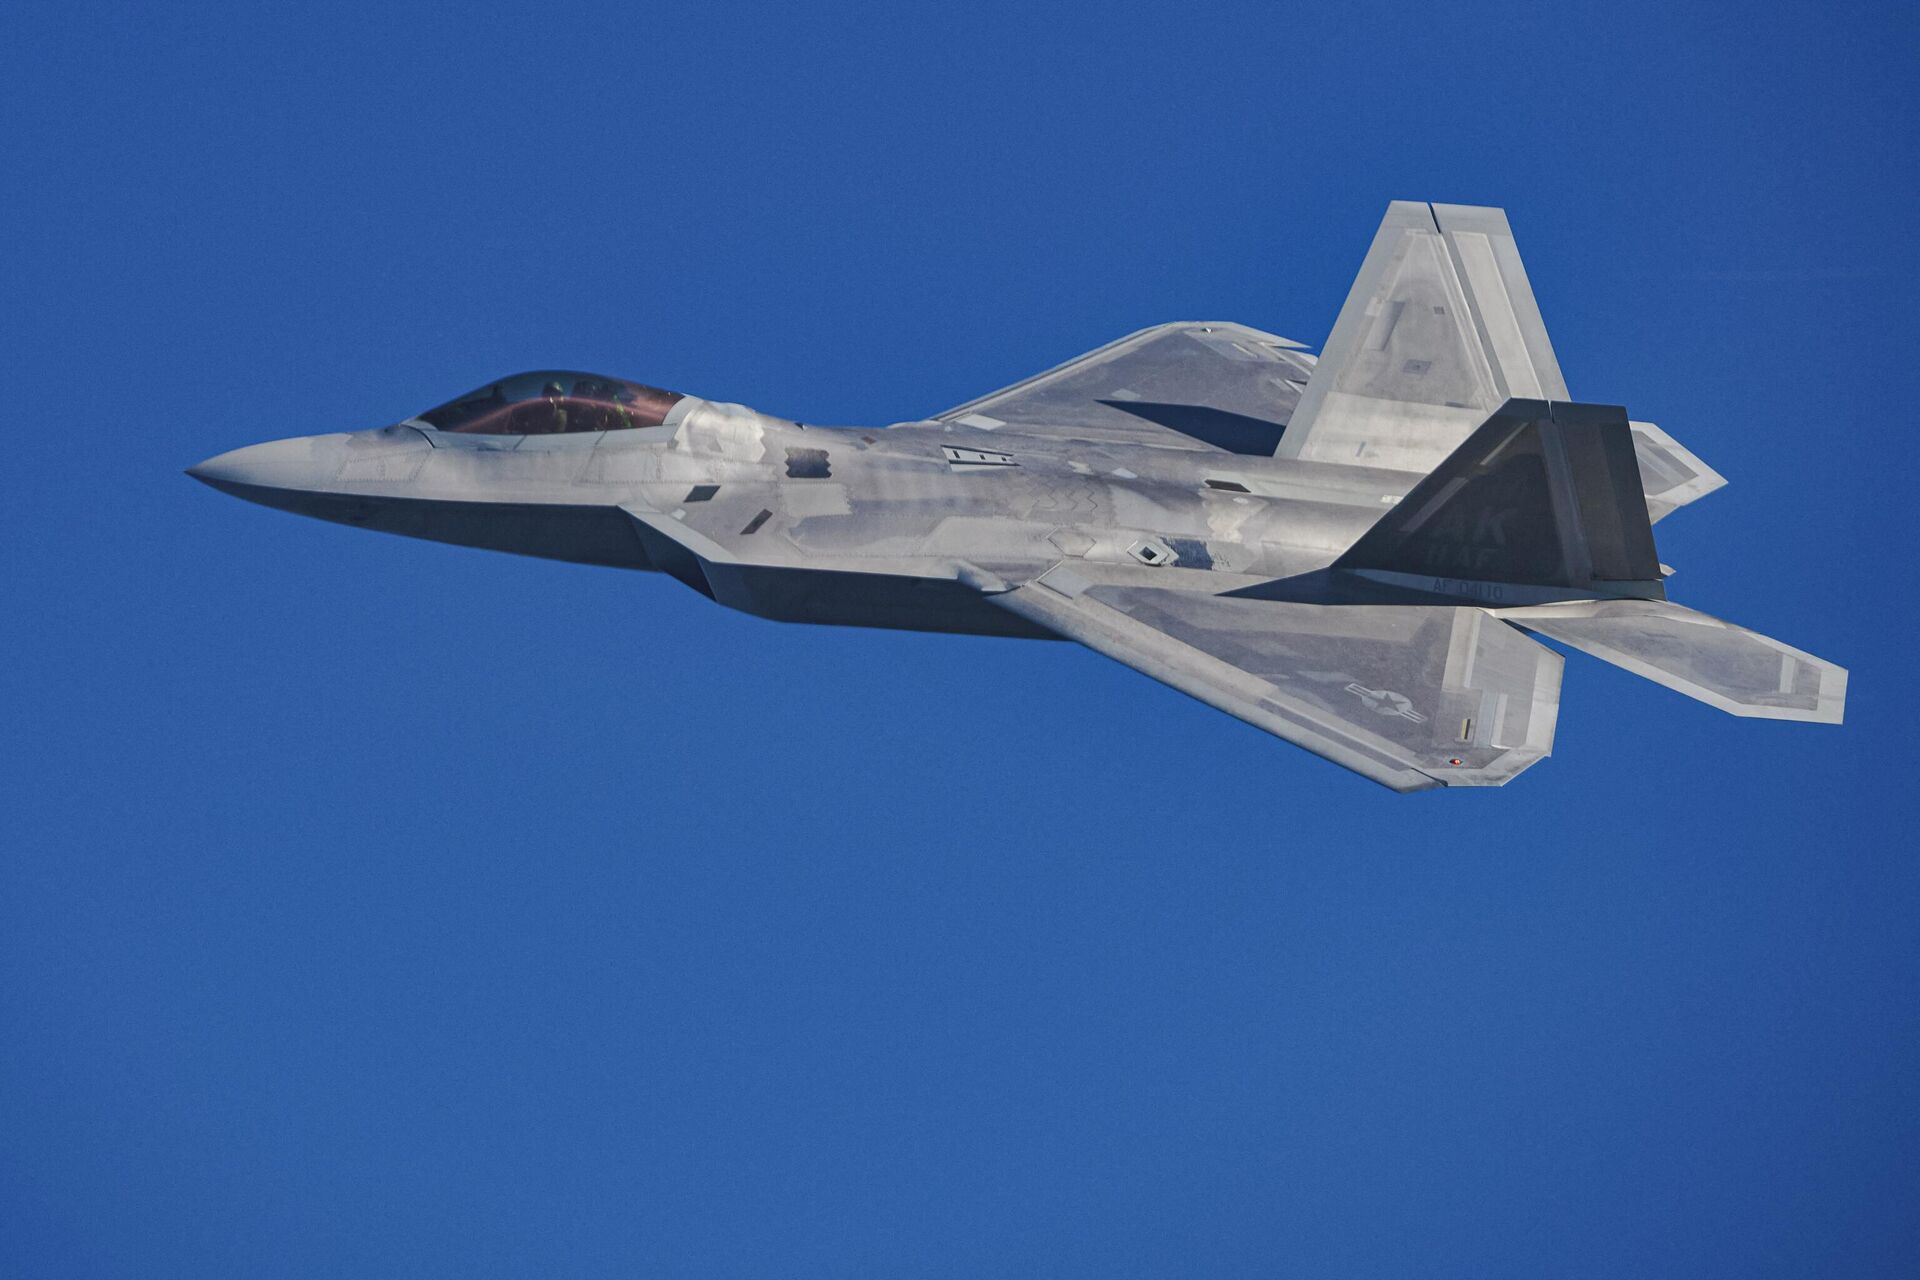 A F 22 Raptor fighter jet takes part in the NATO Air Shielding exercise near the air base in Lask, central Poland on October 12, 2022 - Sputnik International, 1920, 07.02.2023